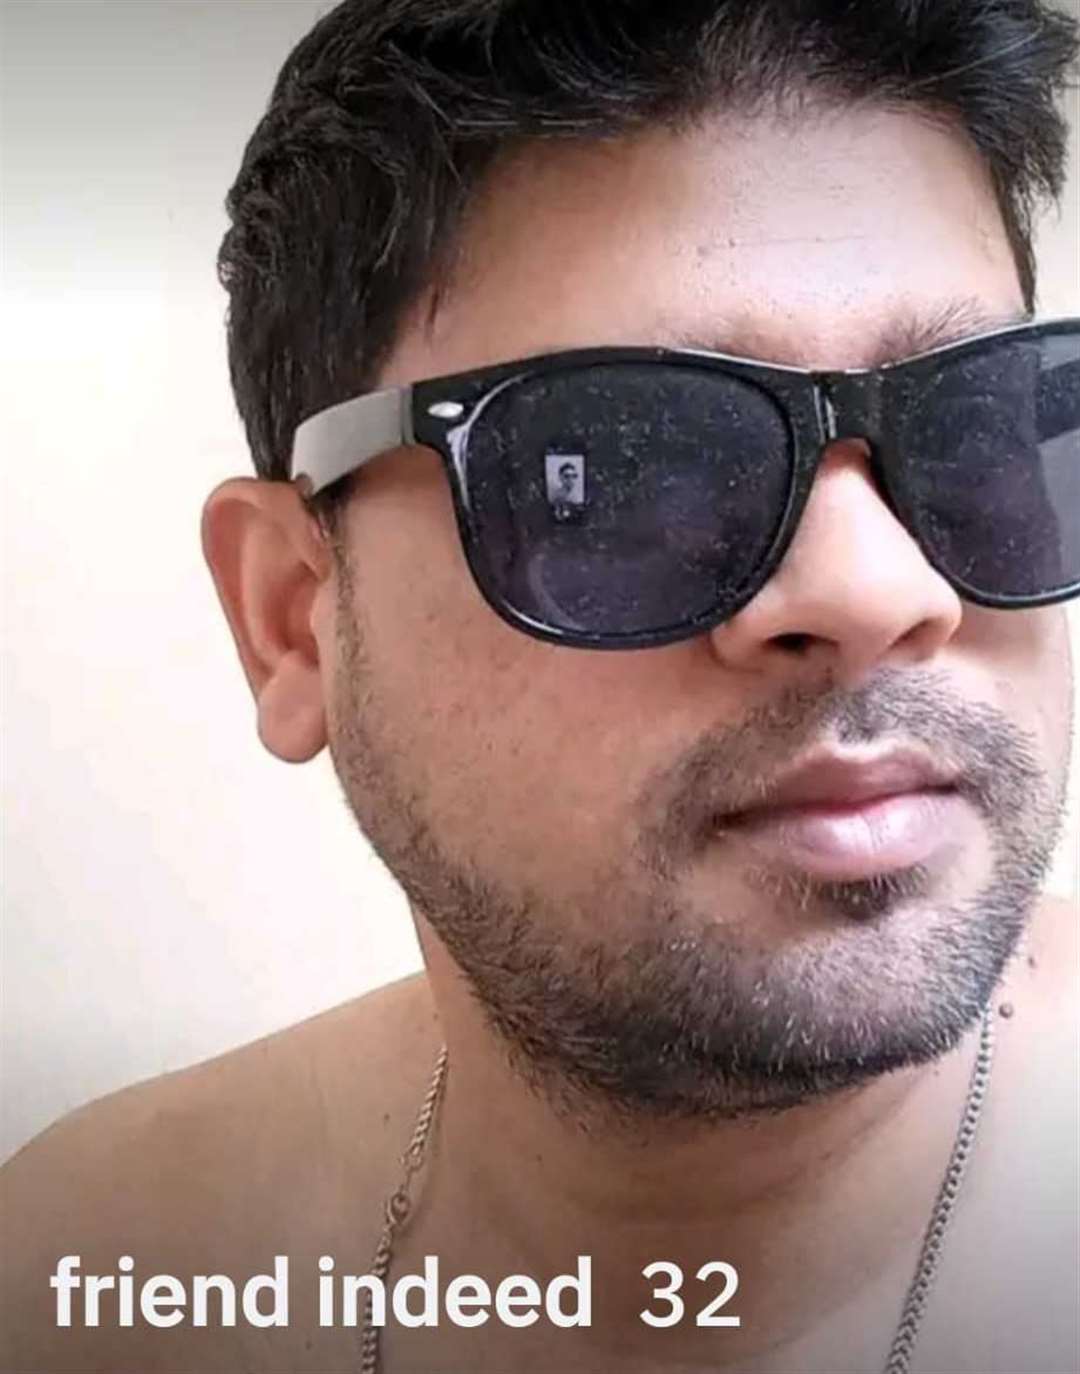 Salman Siddiqi pretended to be 32 in his profile on dating app Grindr